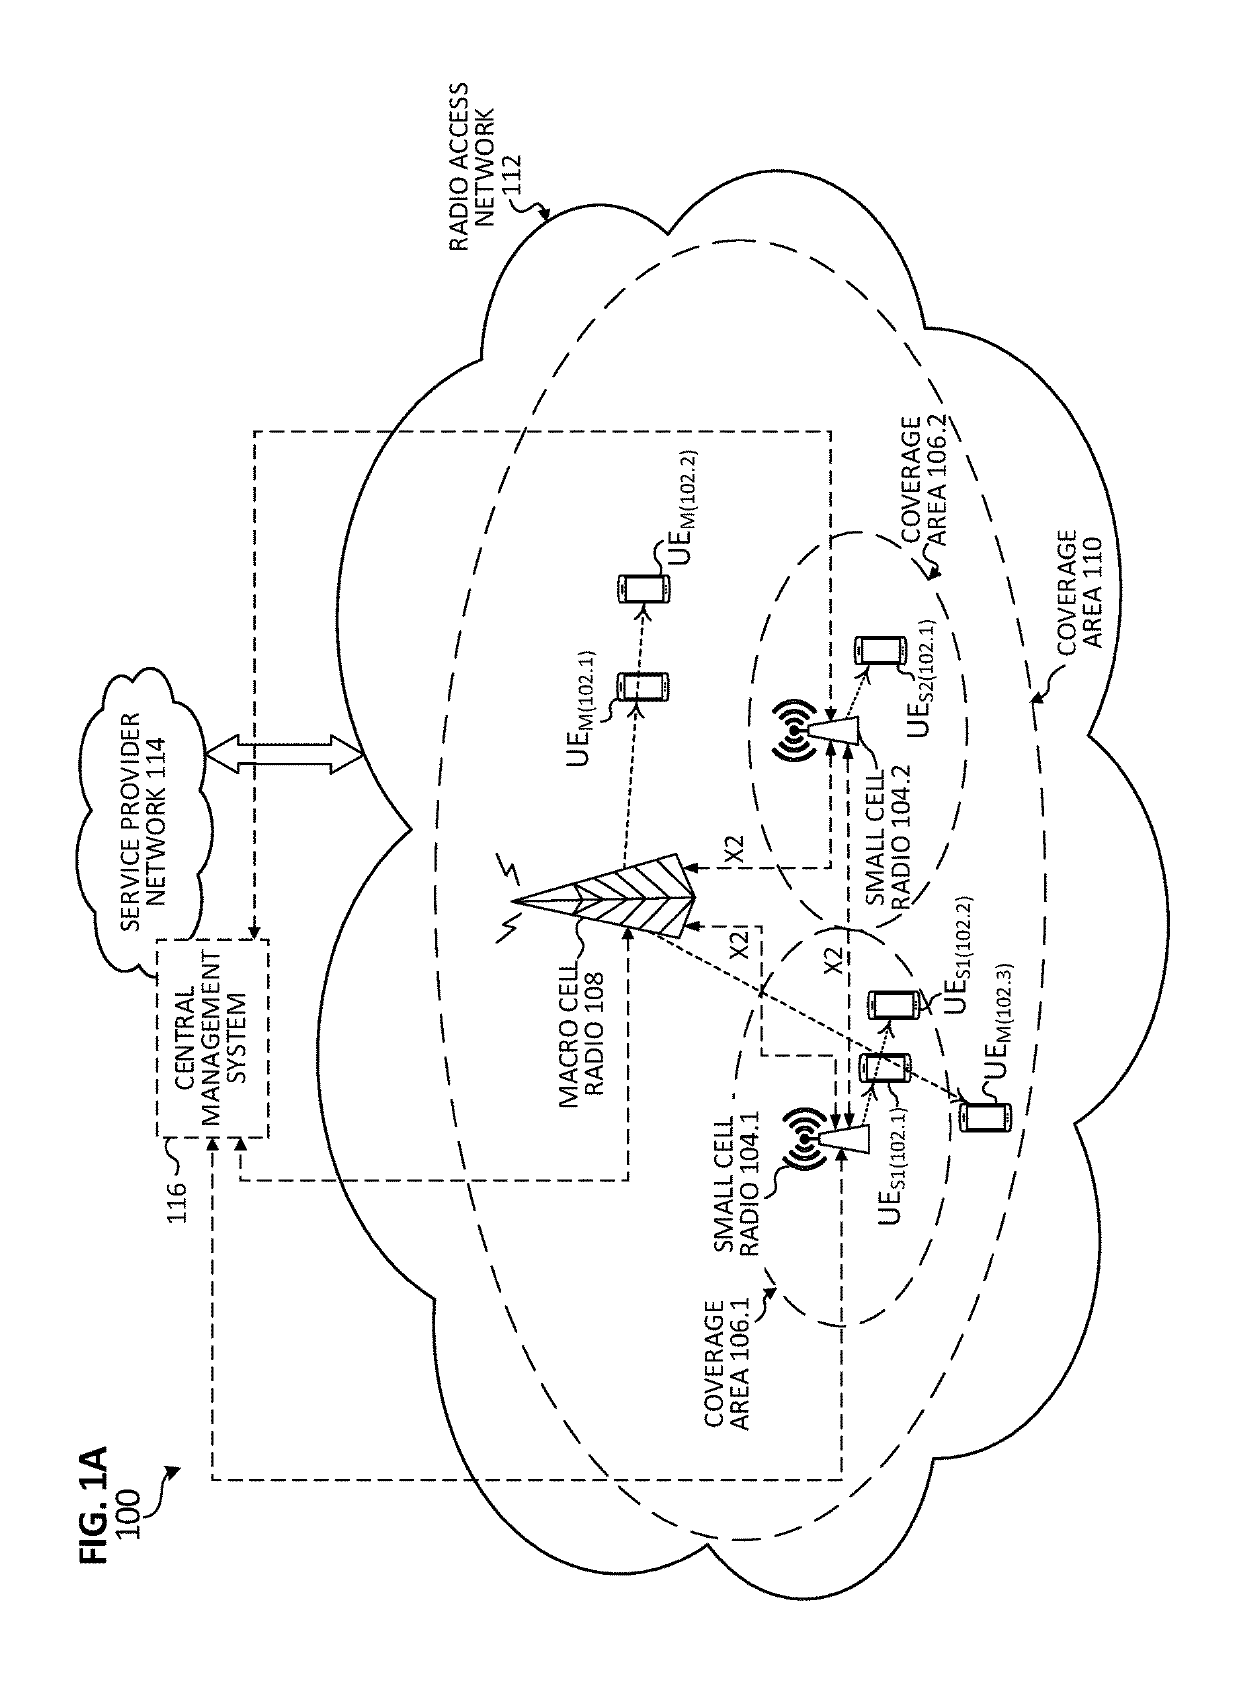 System and method to facilitate power domain interference coordination in a network environment